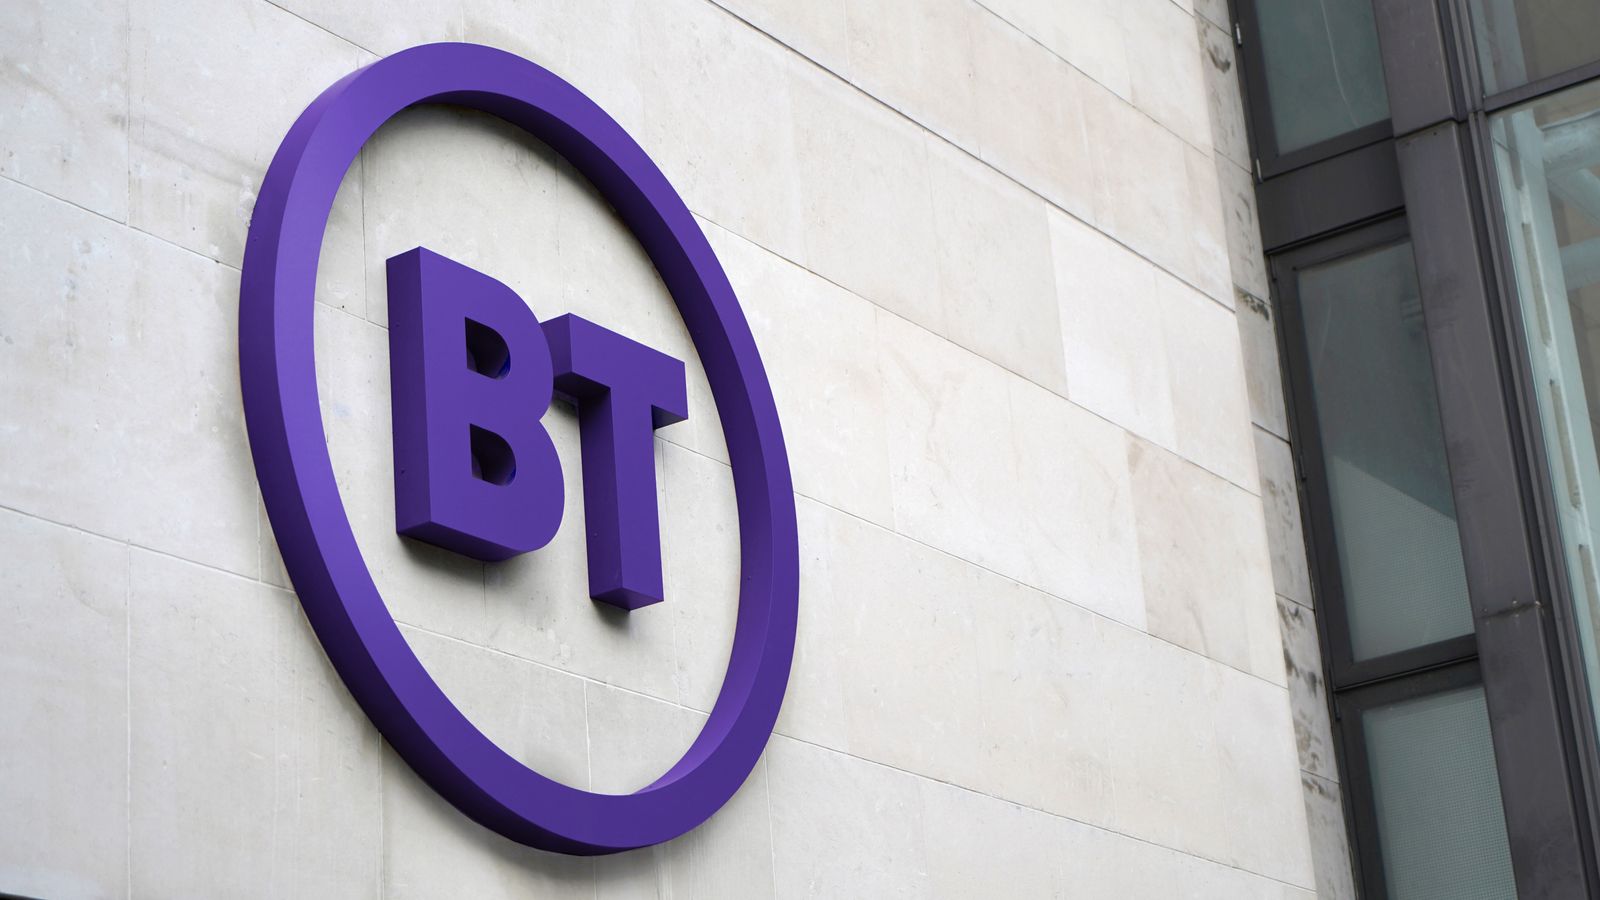 BT to upgrade cost-savings target to £3bn as inflationary pressures bite